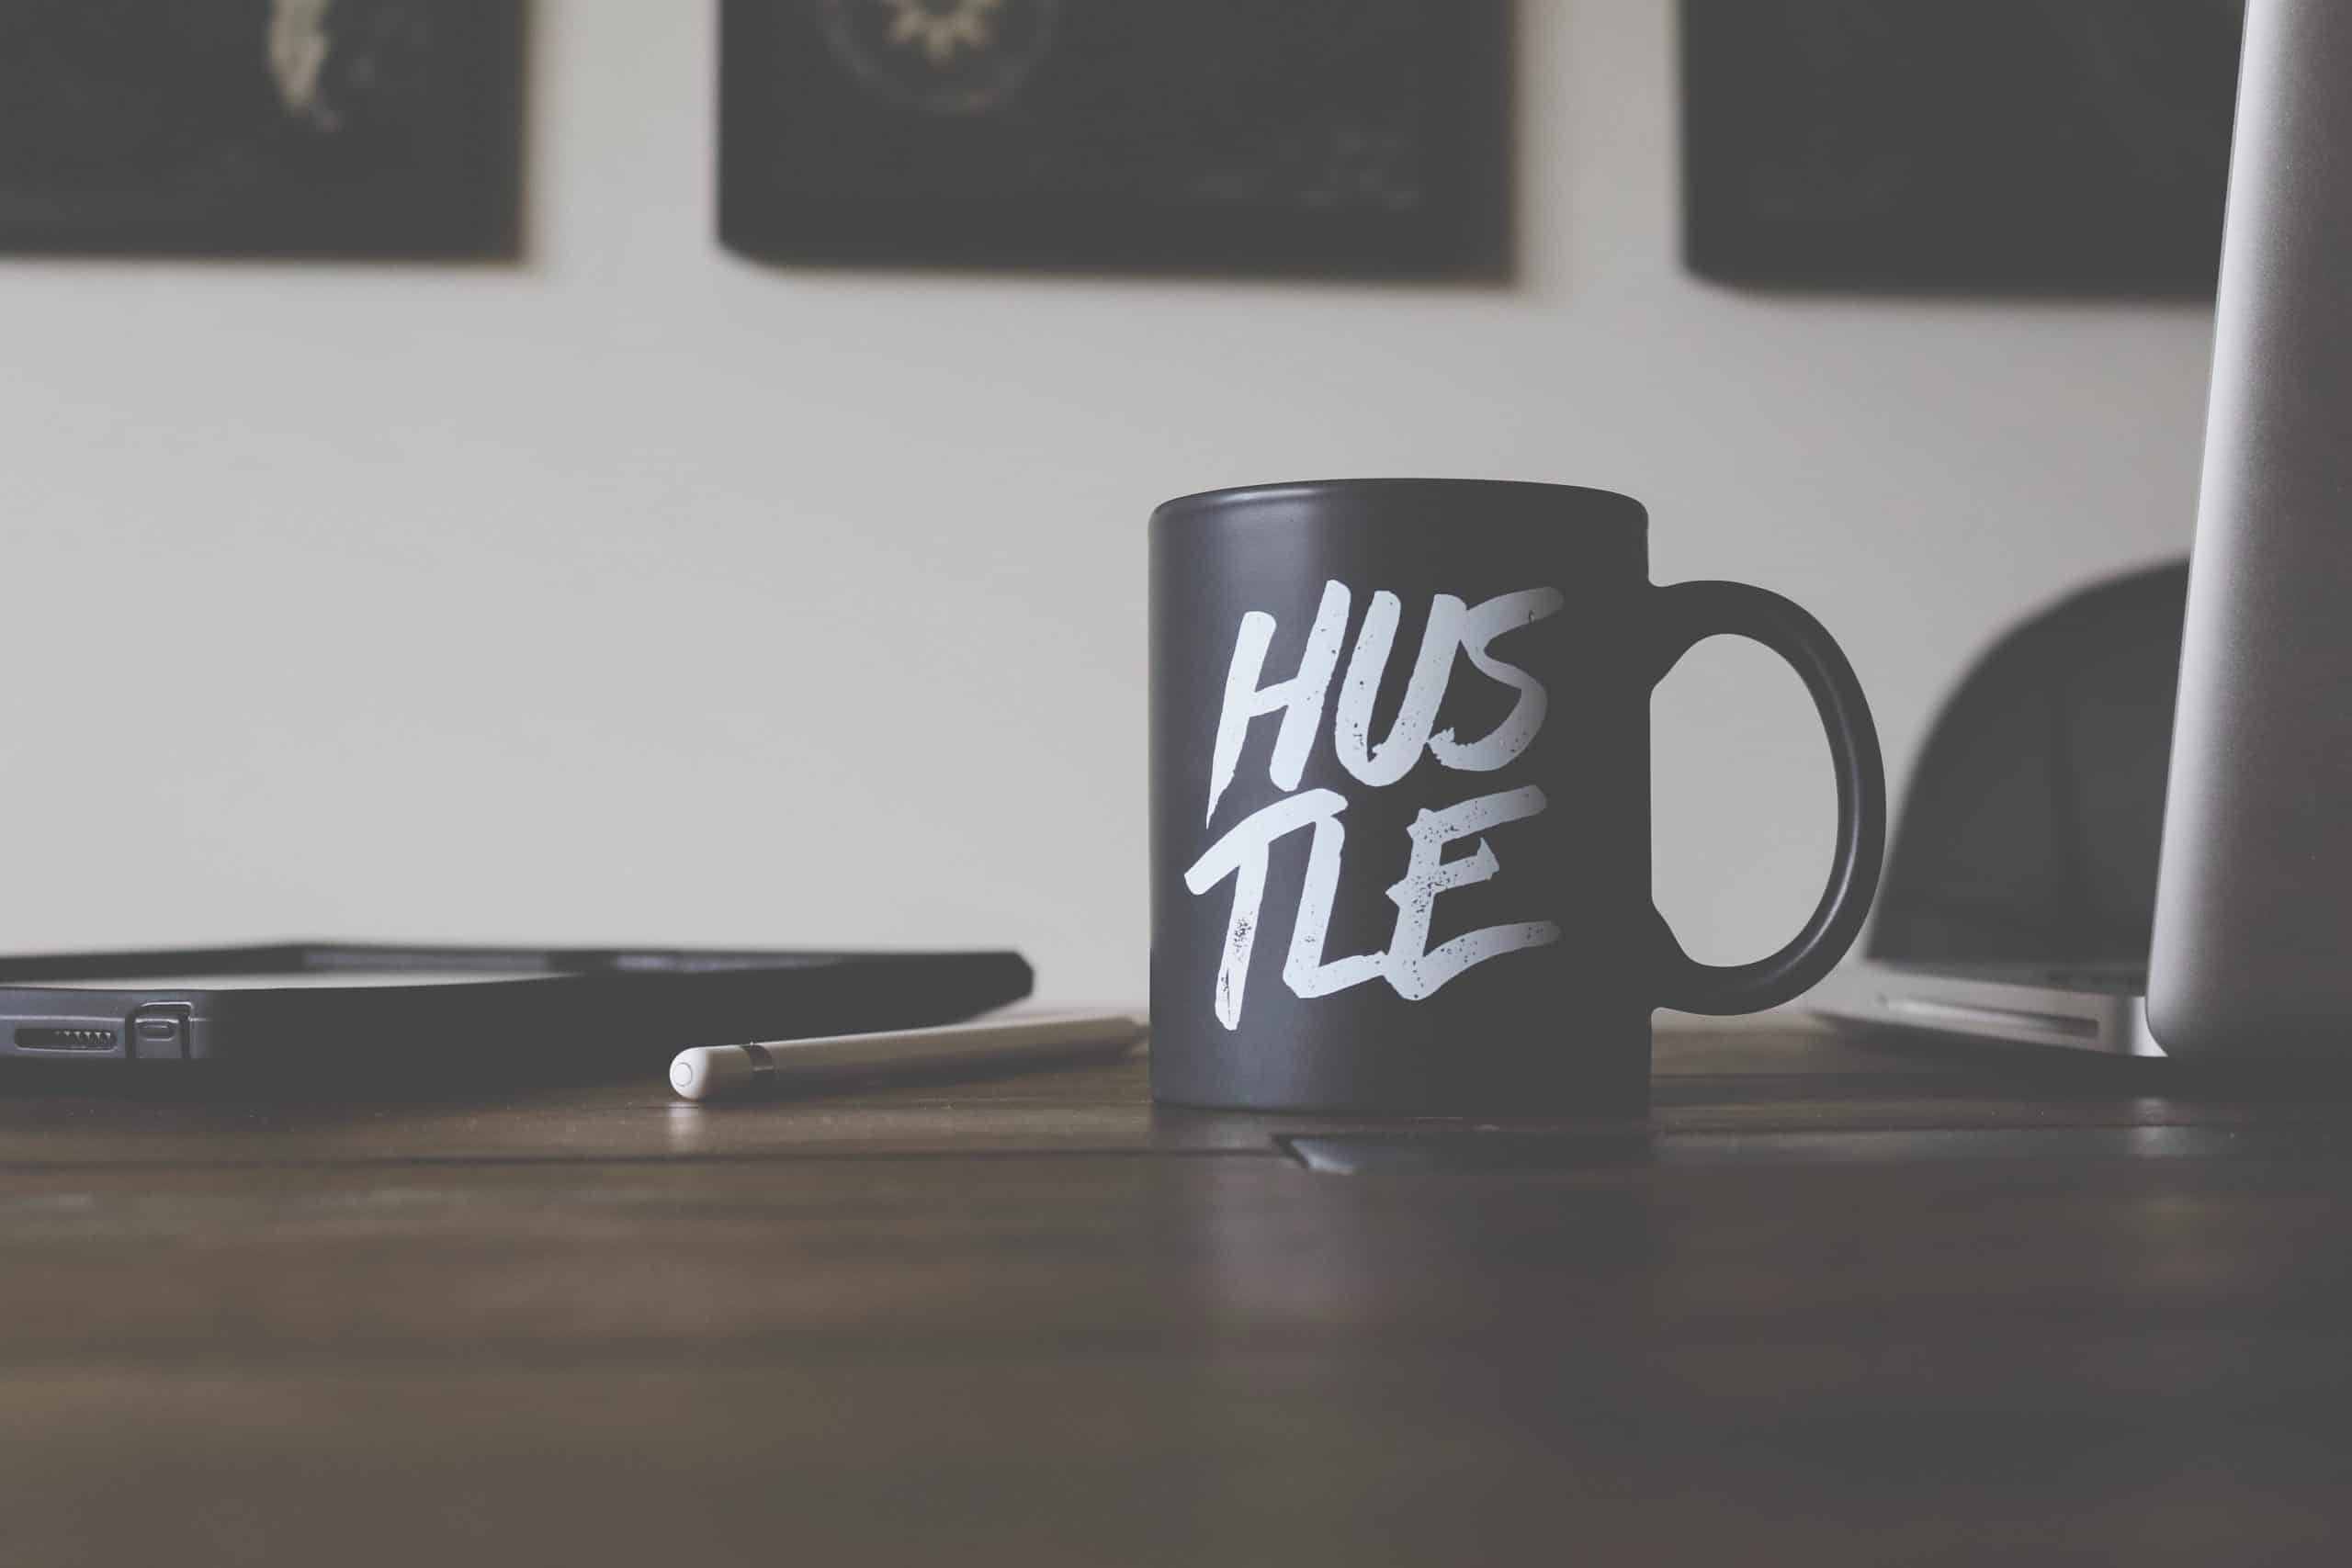 Want to start a side hustle that makes you extra money? Stop wasting your money on online courses and buy these 9 best side hustle books instead!